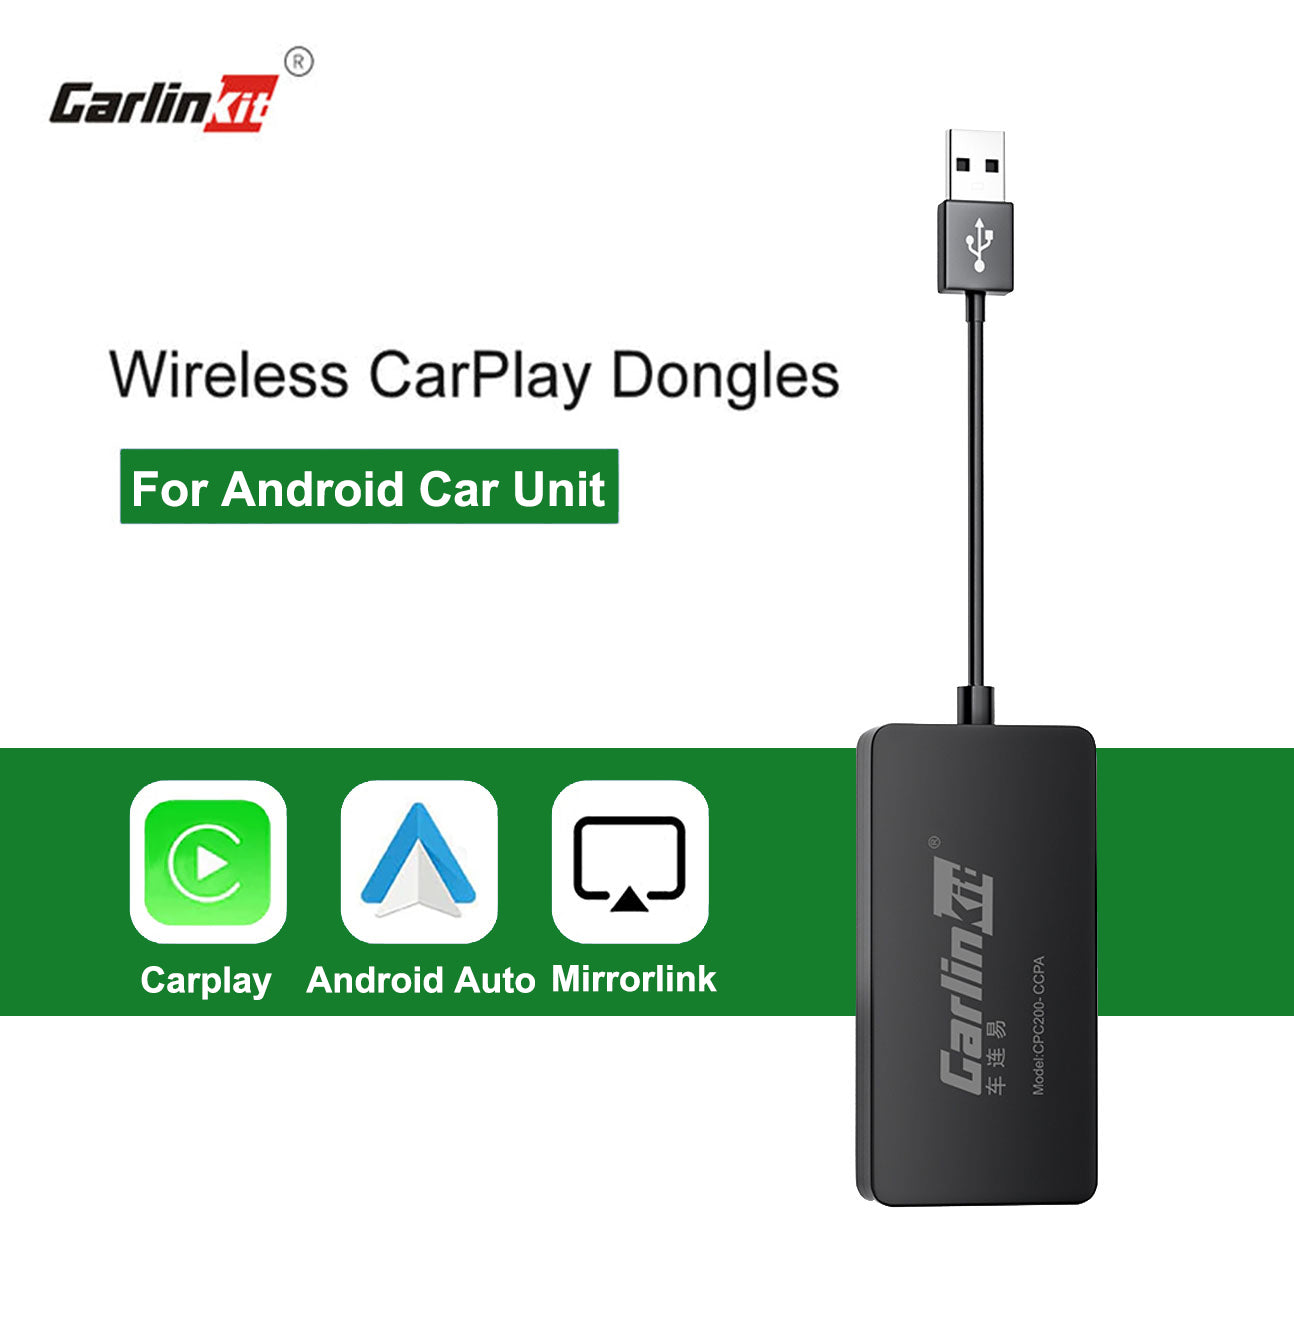 CarlinKit Wired CarPlay Dongle Android Auto for Car India